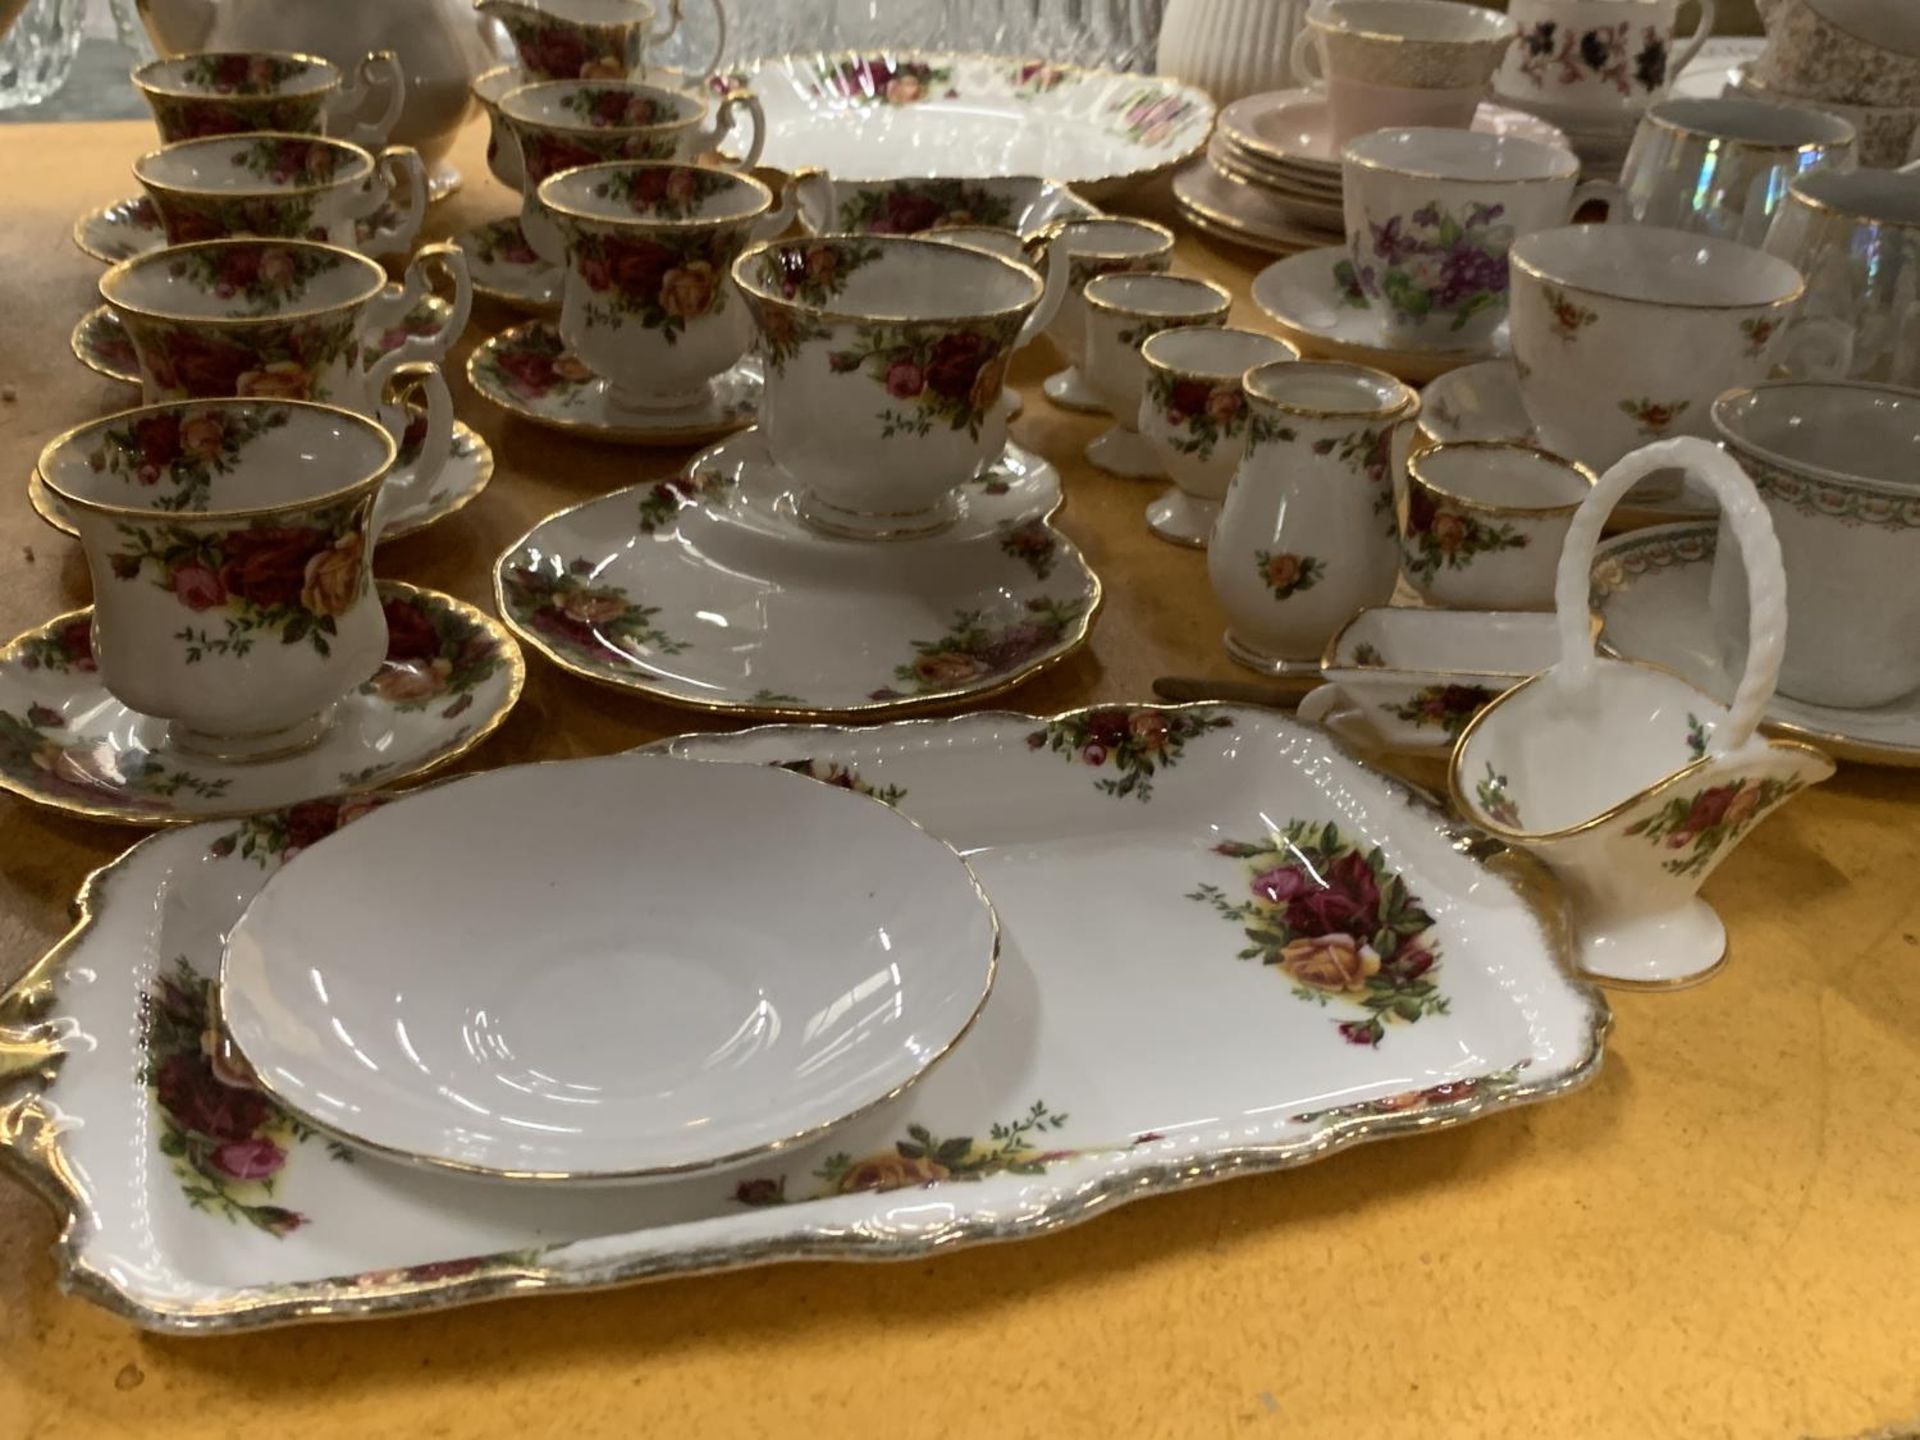 A ROYAL ALBERT 'OLD COUNTRY ROSES' COFFEE SET TO INCLUDE A COFFEE POT, CREAM JUG, SUGAR BOWL, CAKE - Image 4 of 4